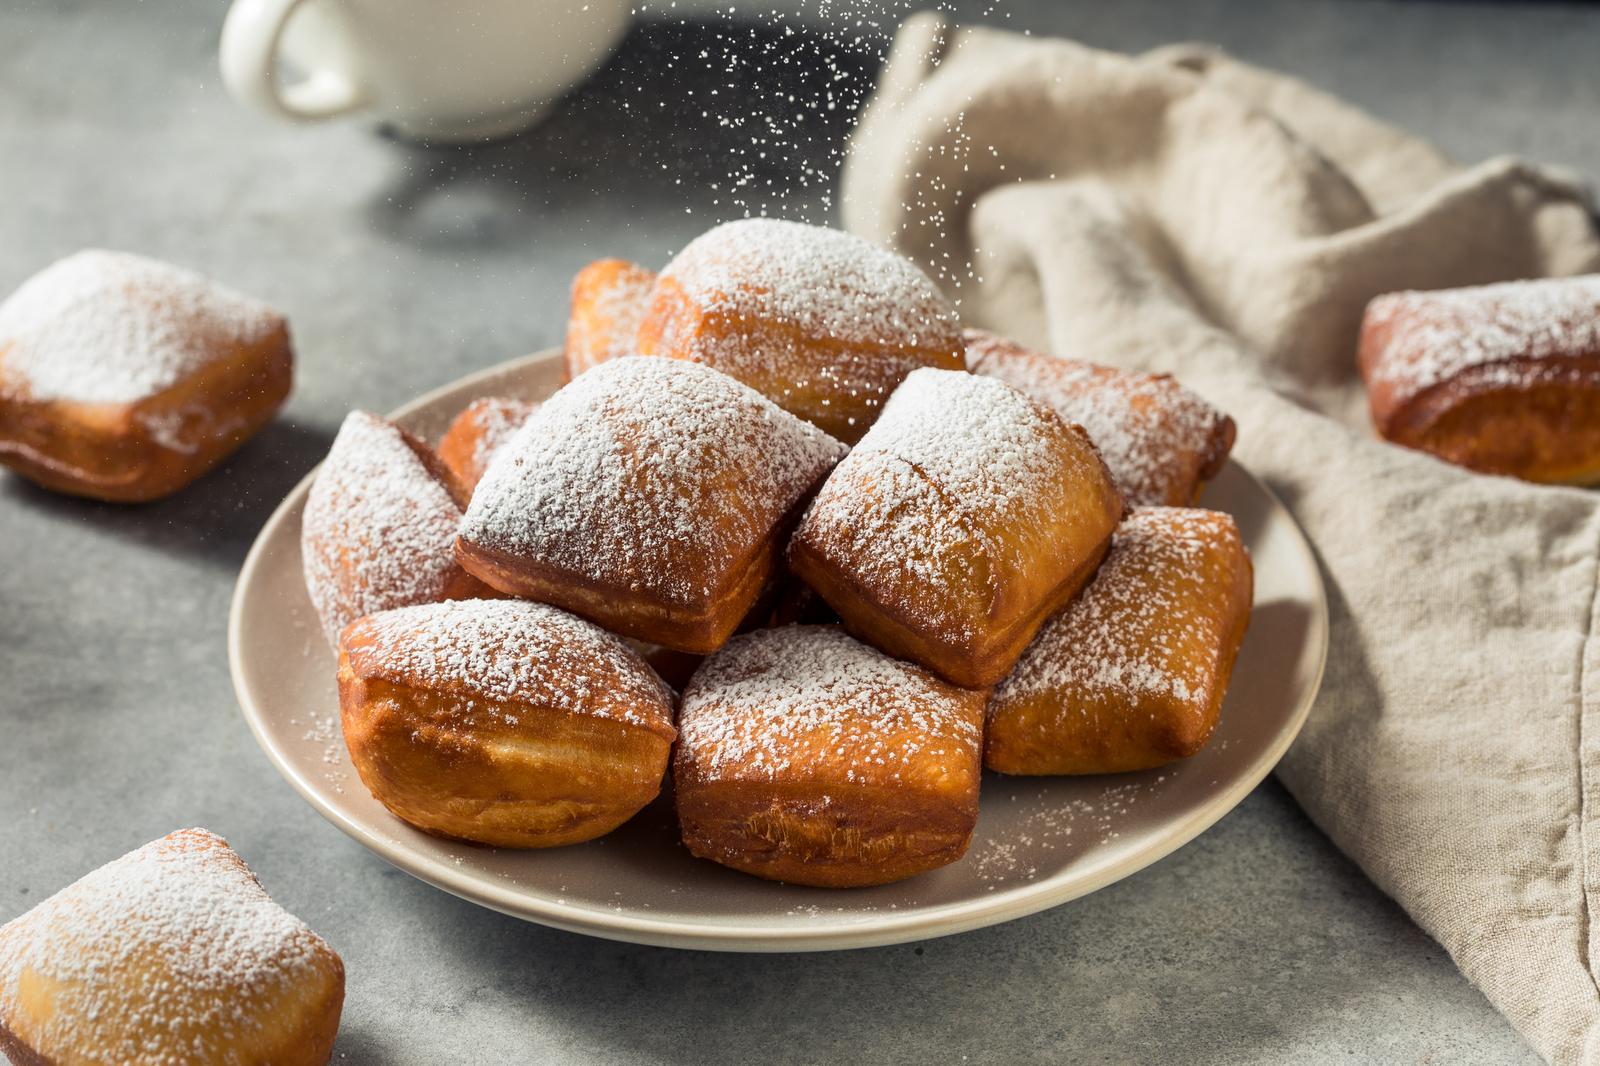 This Picture Quiz Will Challenge Your Knowledge of Classic French Desserts 🥐 – Can You Score High? Beignets